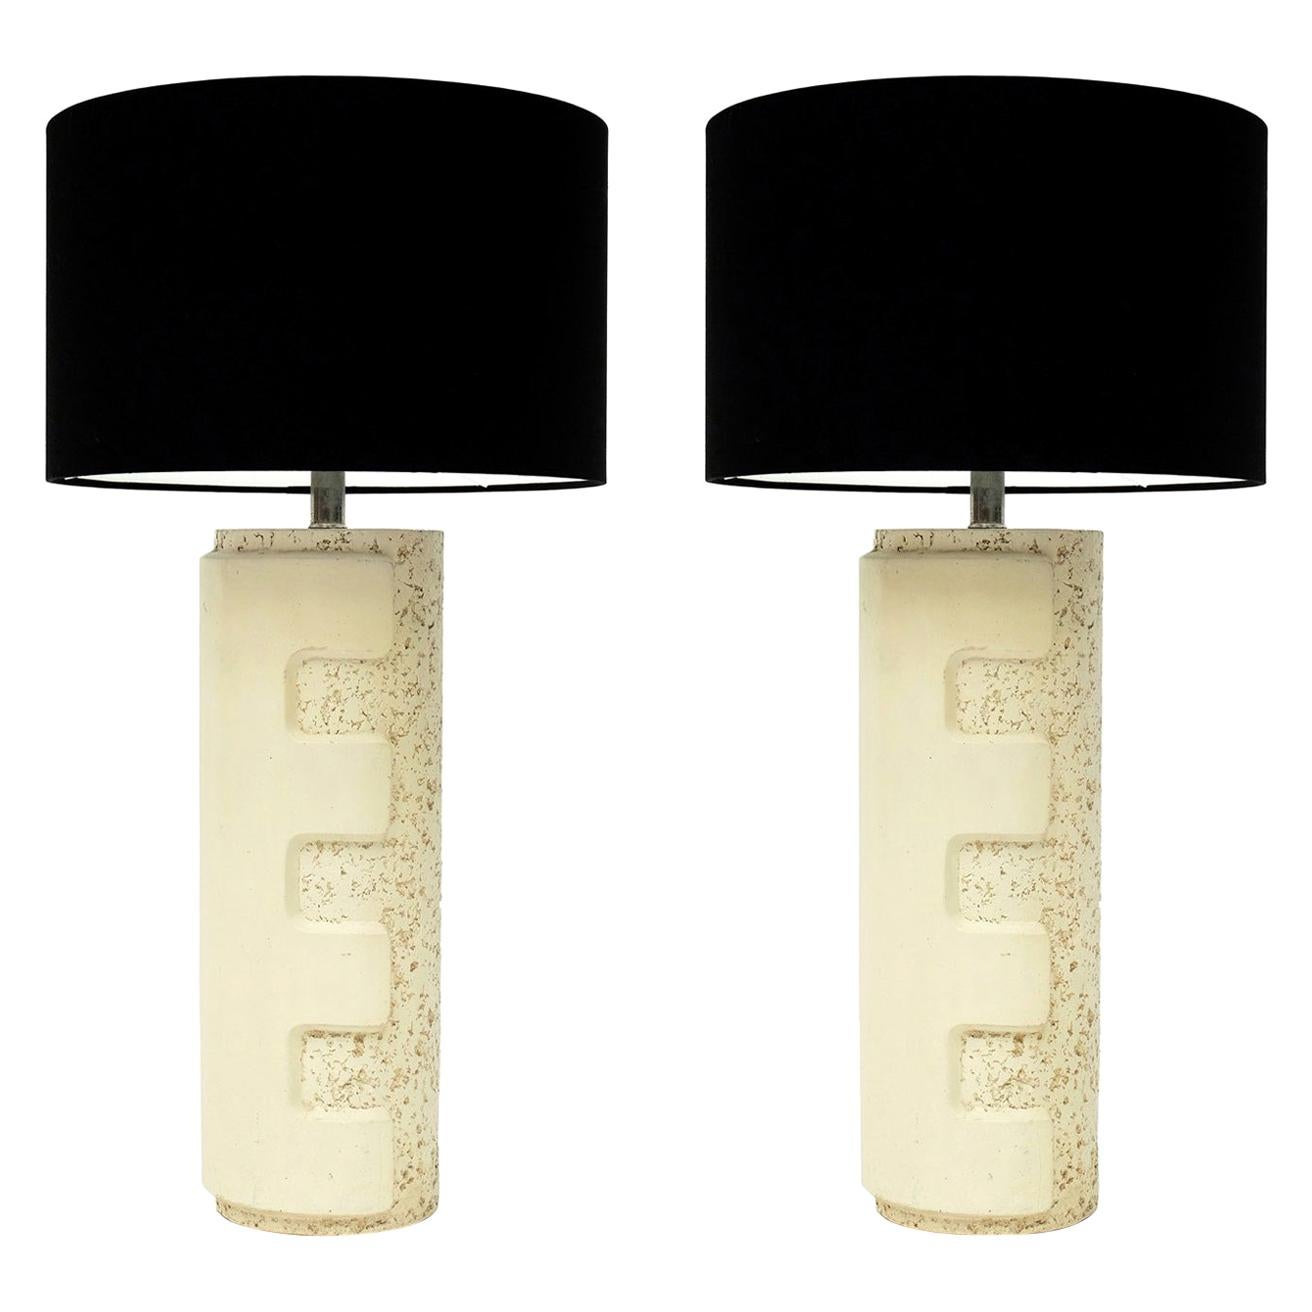 Pair of Large 1970s Brutalist Ceramic Cylinder Table Lamps